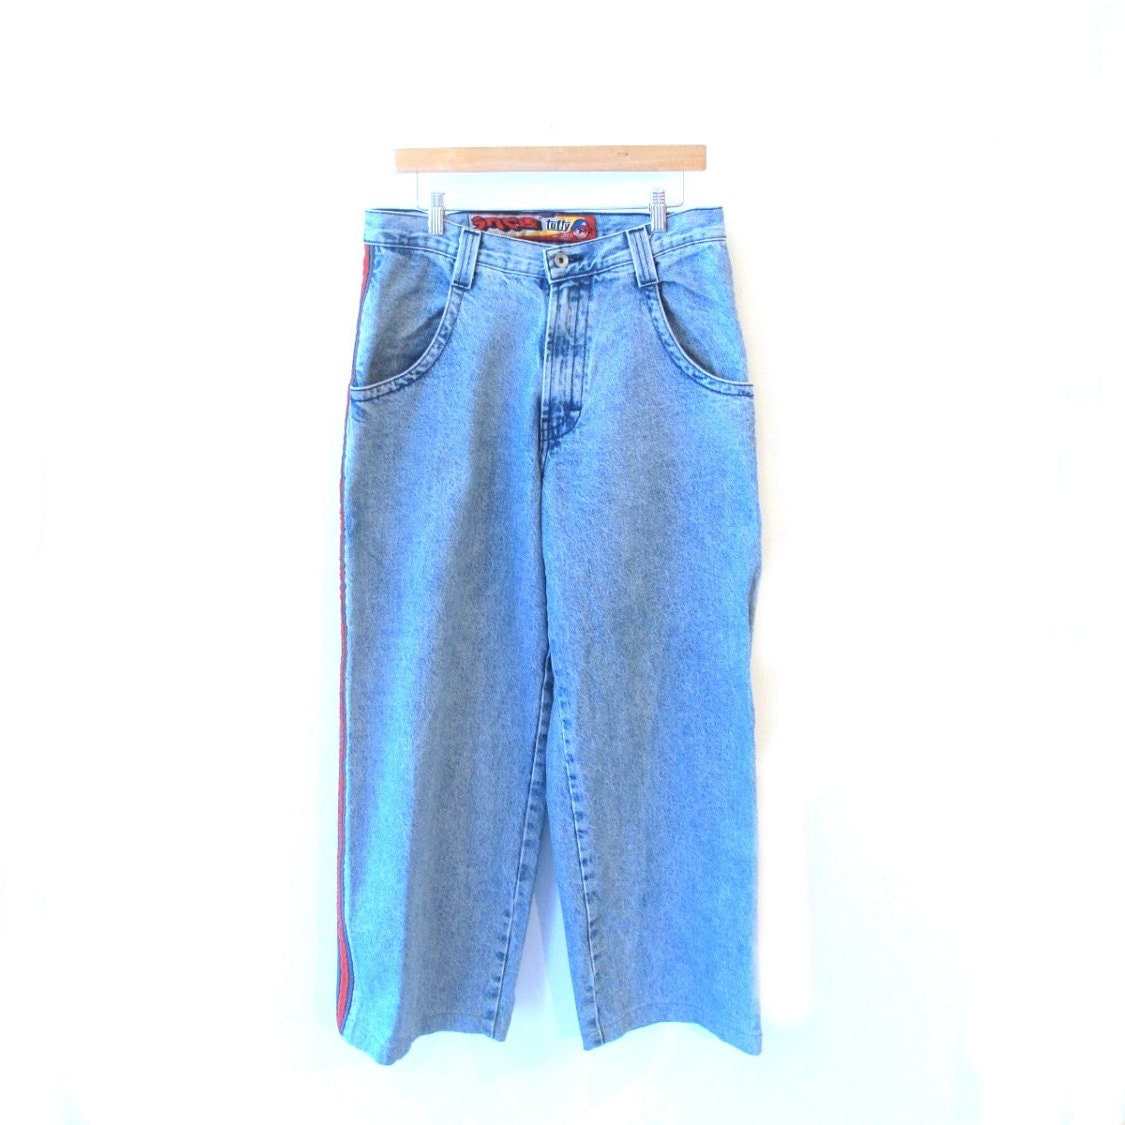 JNCO Jeans 90s Tuffy Style Light Blue Denim Wash Rave Candy